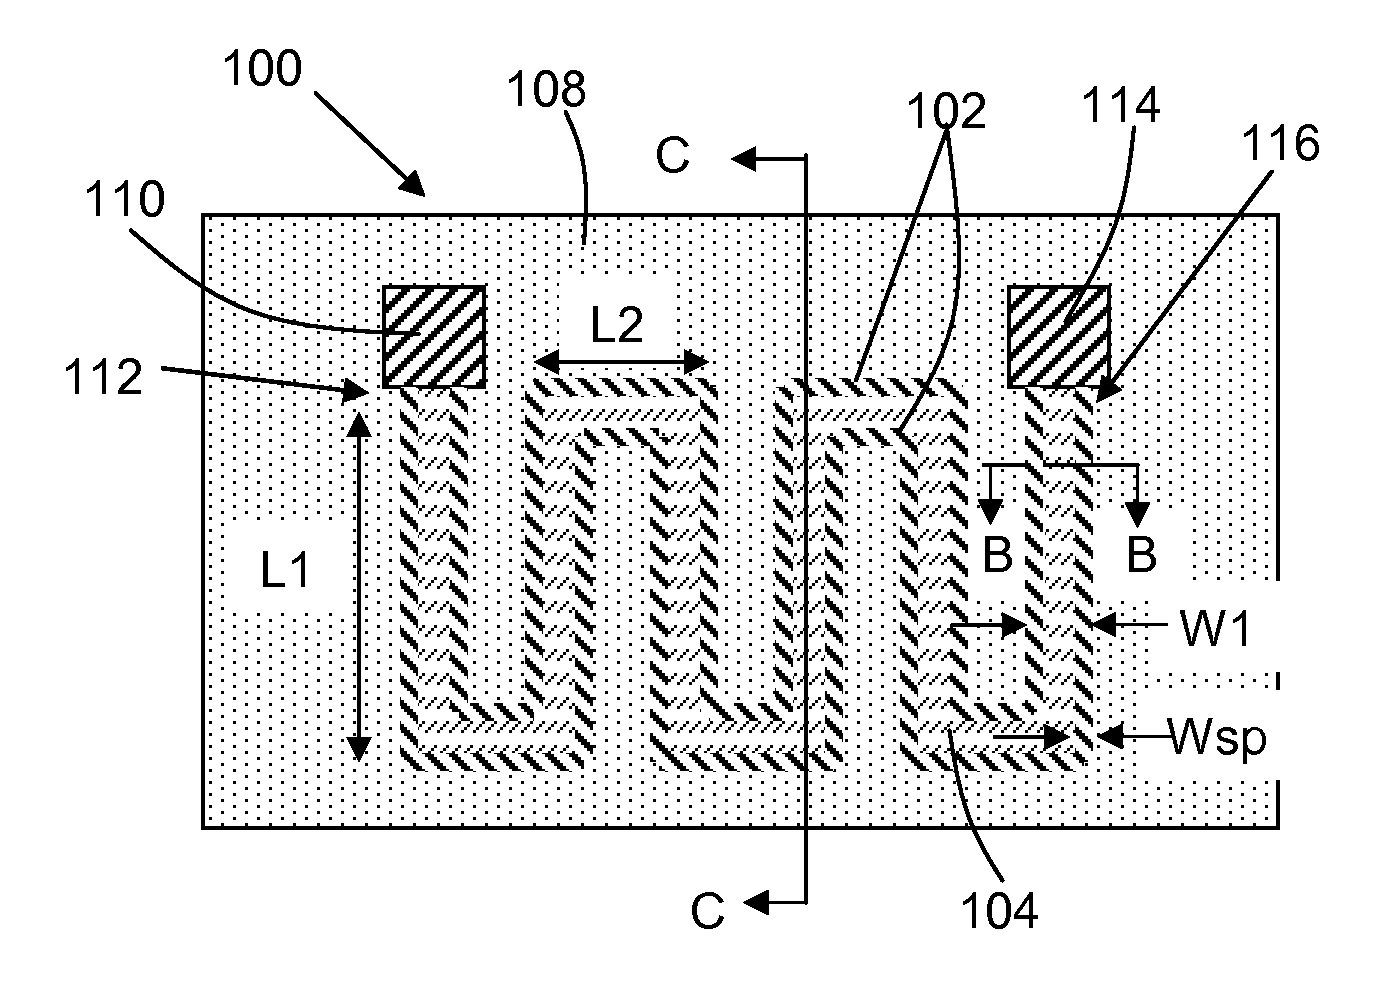 Resistor and design structure having substantially parallel resistor material lengths